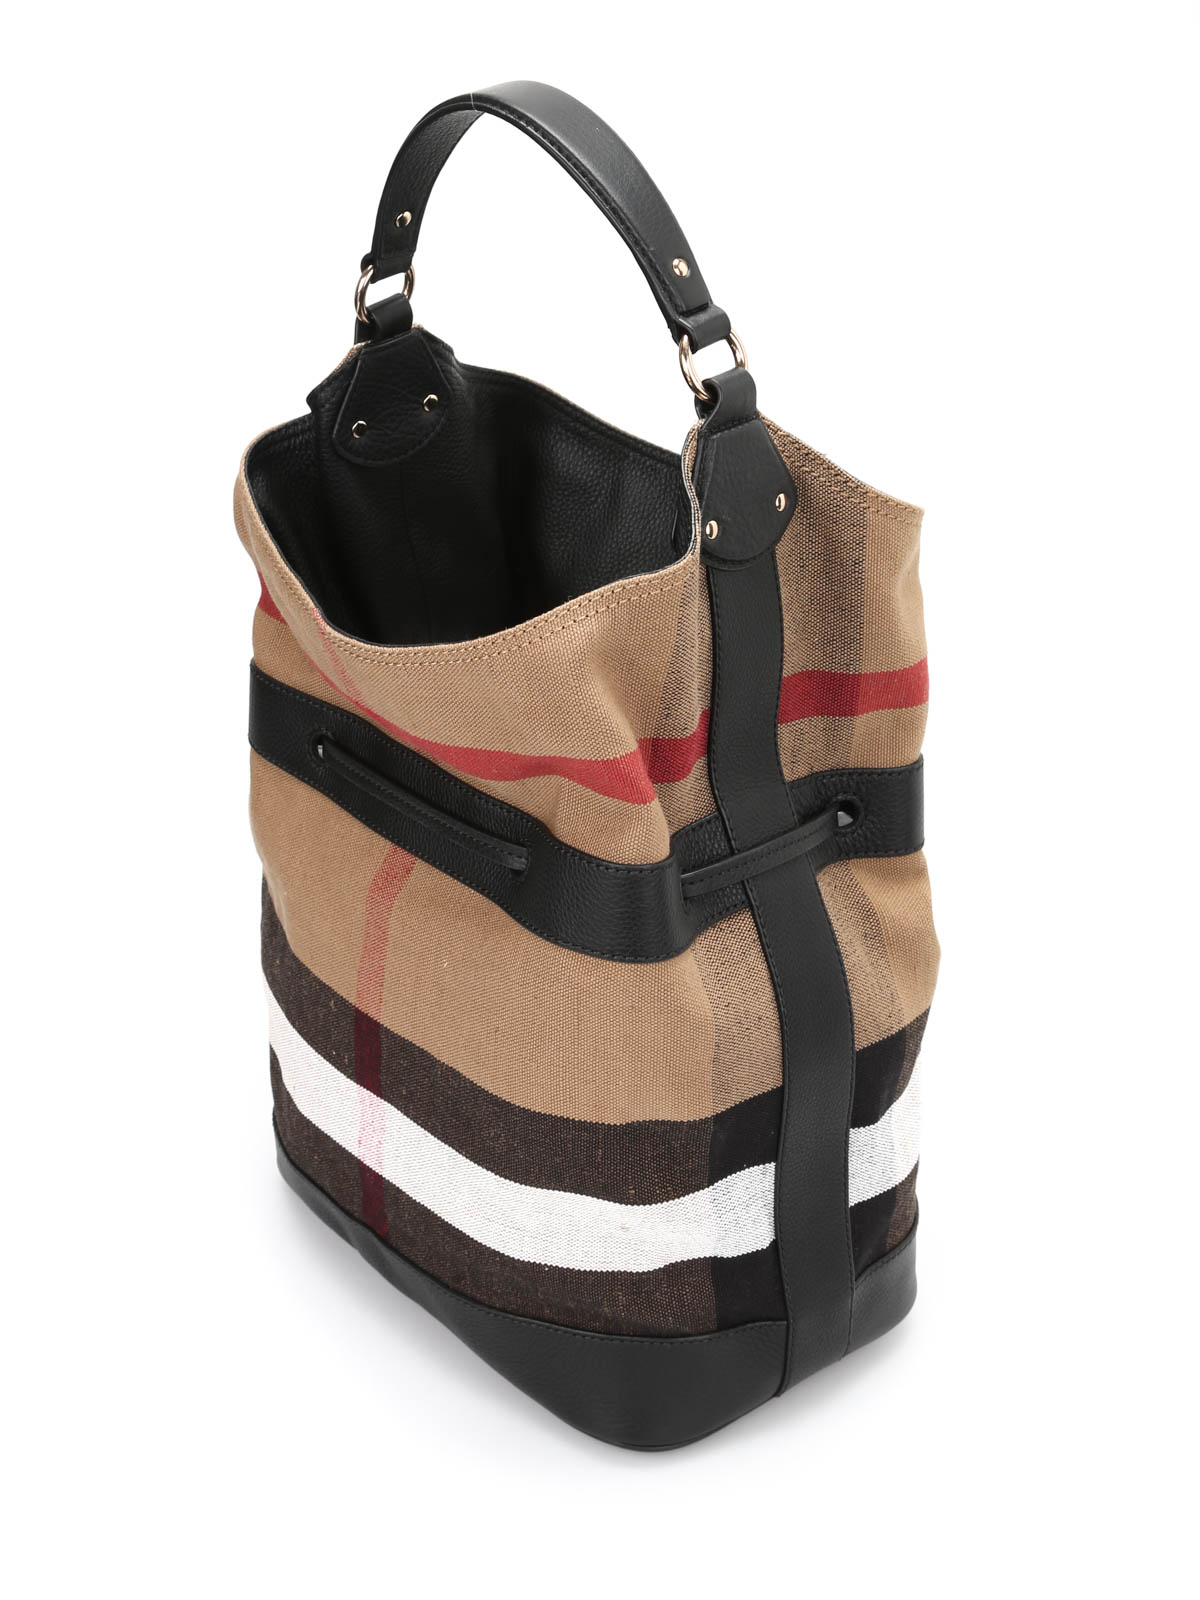 burberry canvas bags